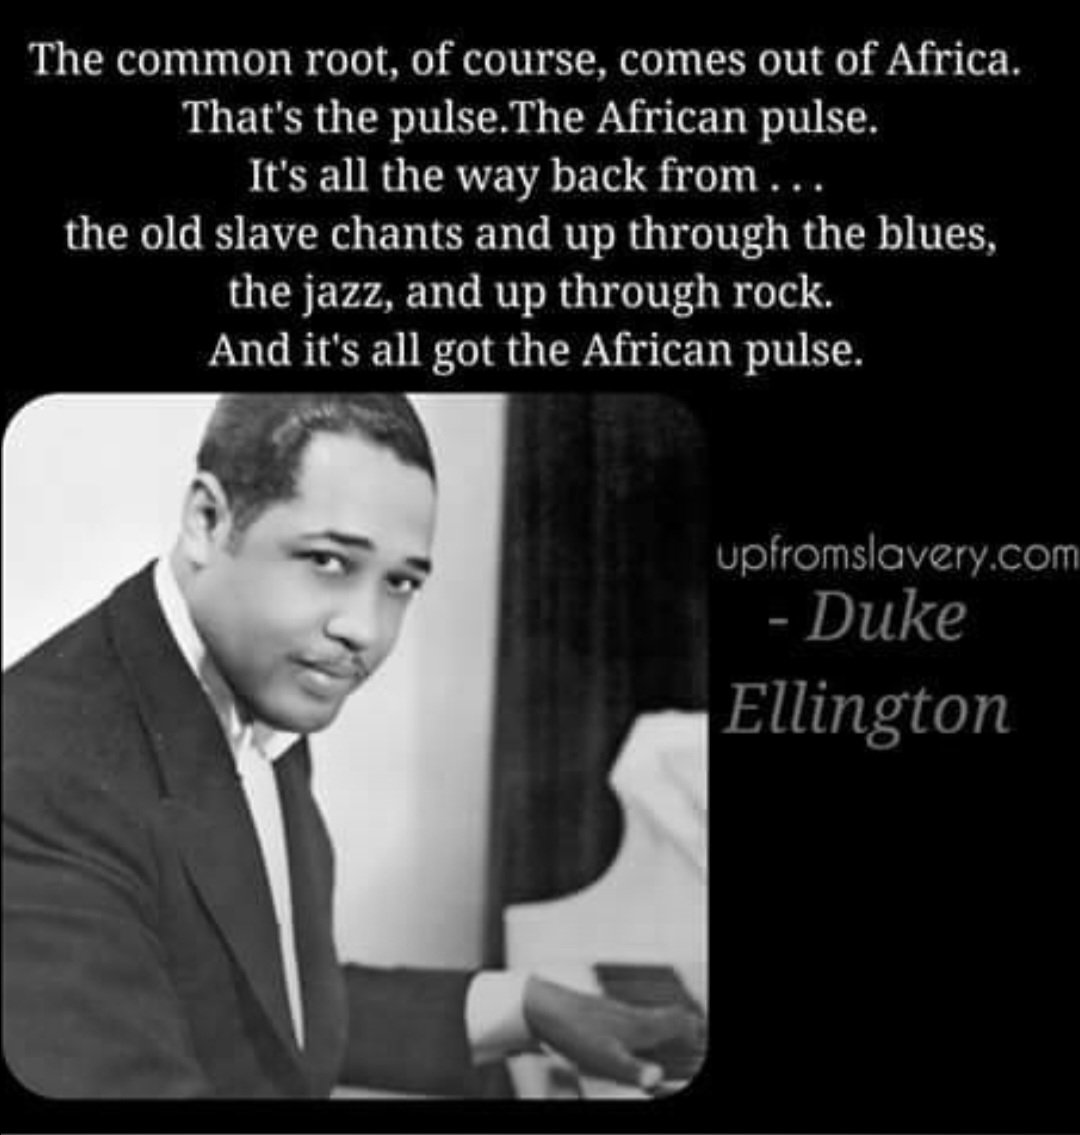 'The common root, of course, comes out of Africa. That's the pulse. The African pulse.' Happy Birthday 🎂 🎉 Edward Kennedy 'Duke' Ellington April 29, 1899-May 24, 1974